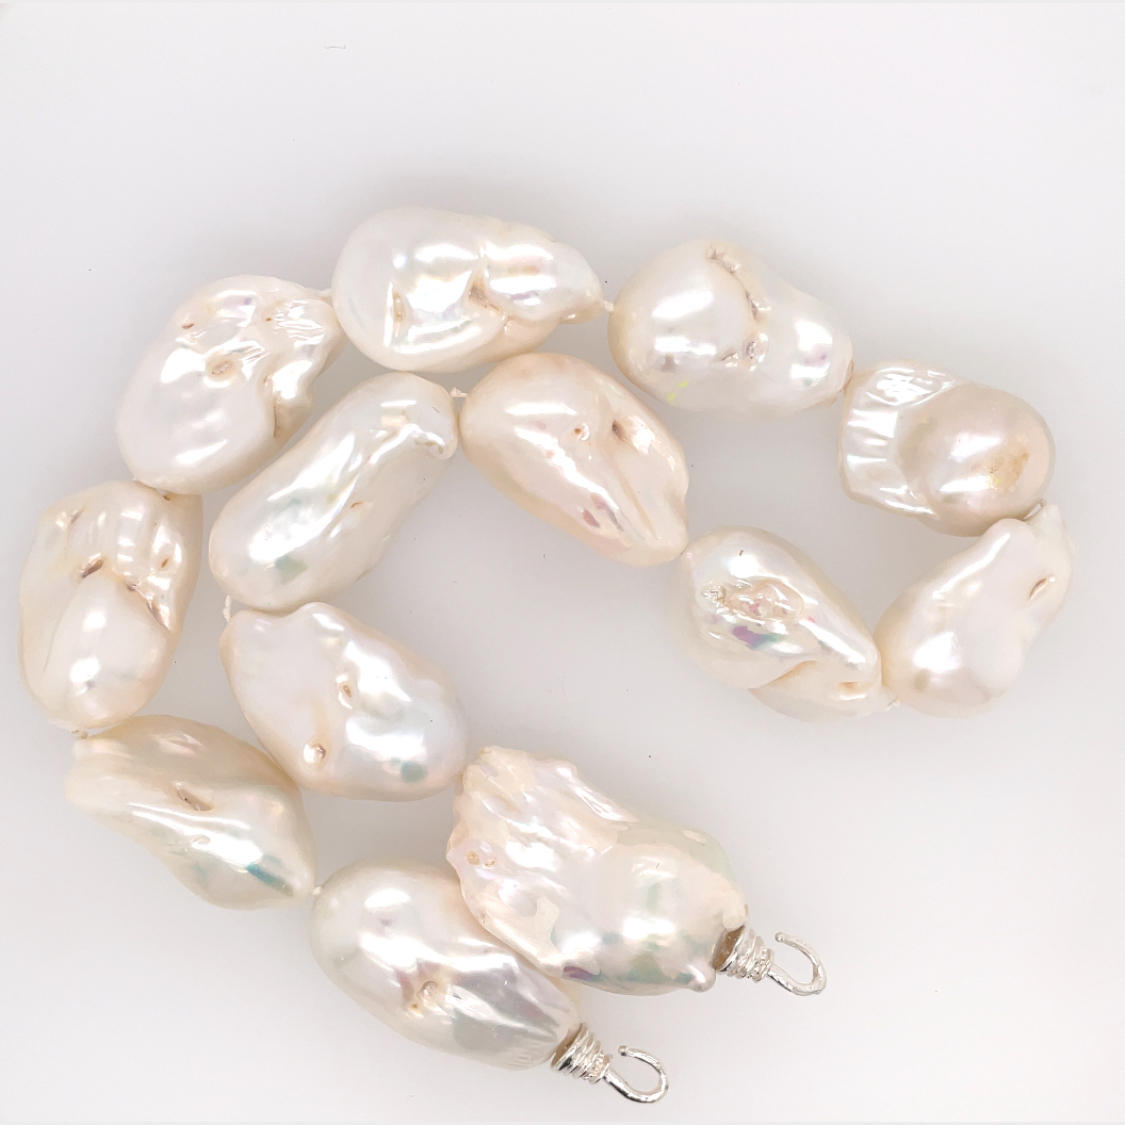 Jumbo Freshwater Elongated Baroque Pearls, Hand Knotted on Hand Cast Bronze Hooks. Unusual and rare pearls approx.